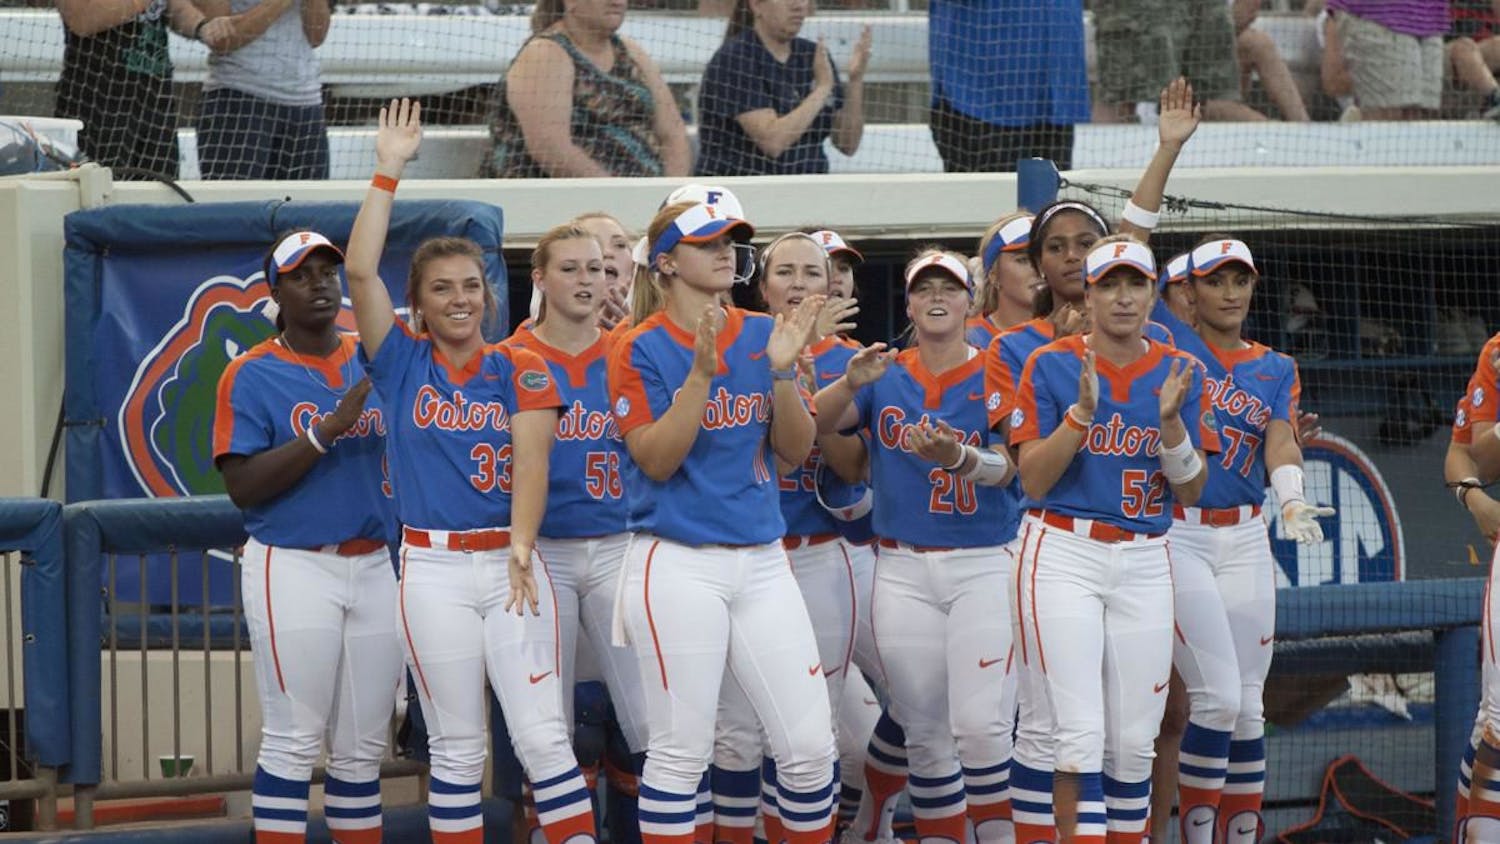 The Gators applaud outside of their dugout during a game last season